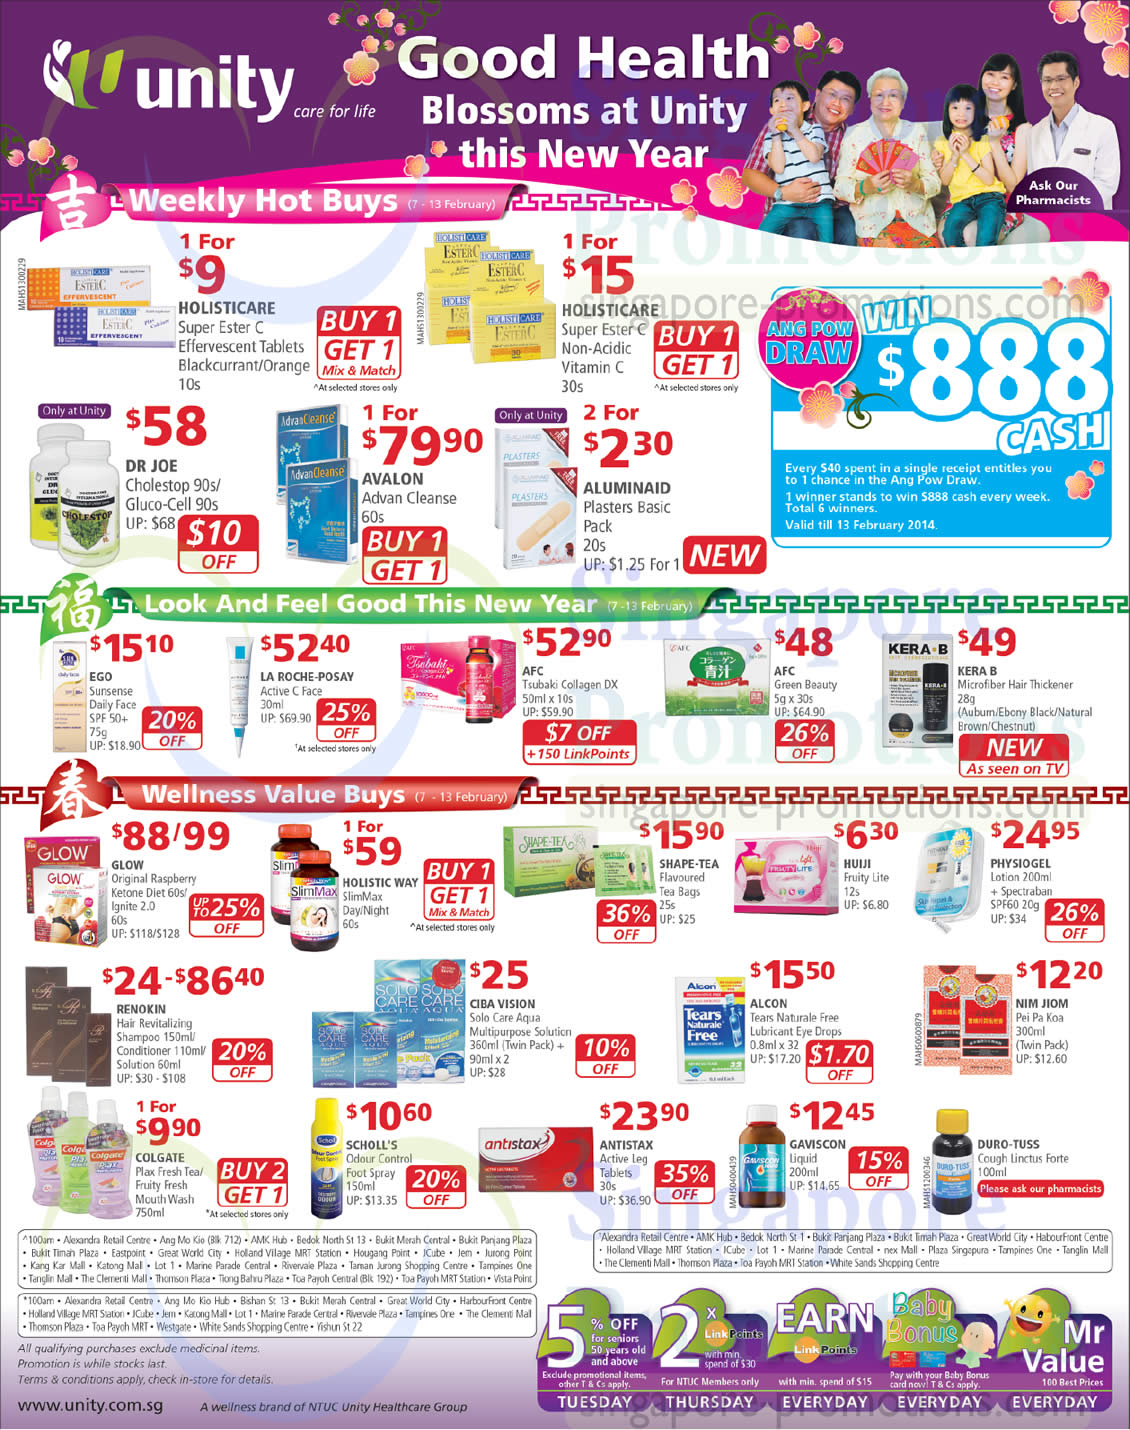 Featured image for NTUC Unity Health Offers & Promotions 29 Jan - 13 Feb 2014